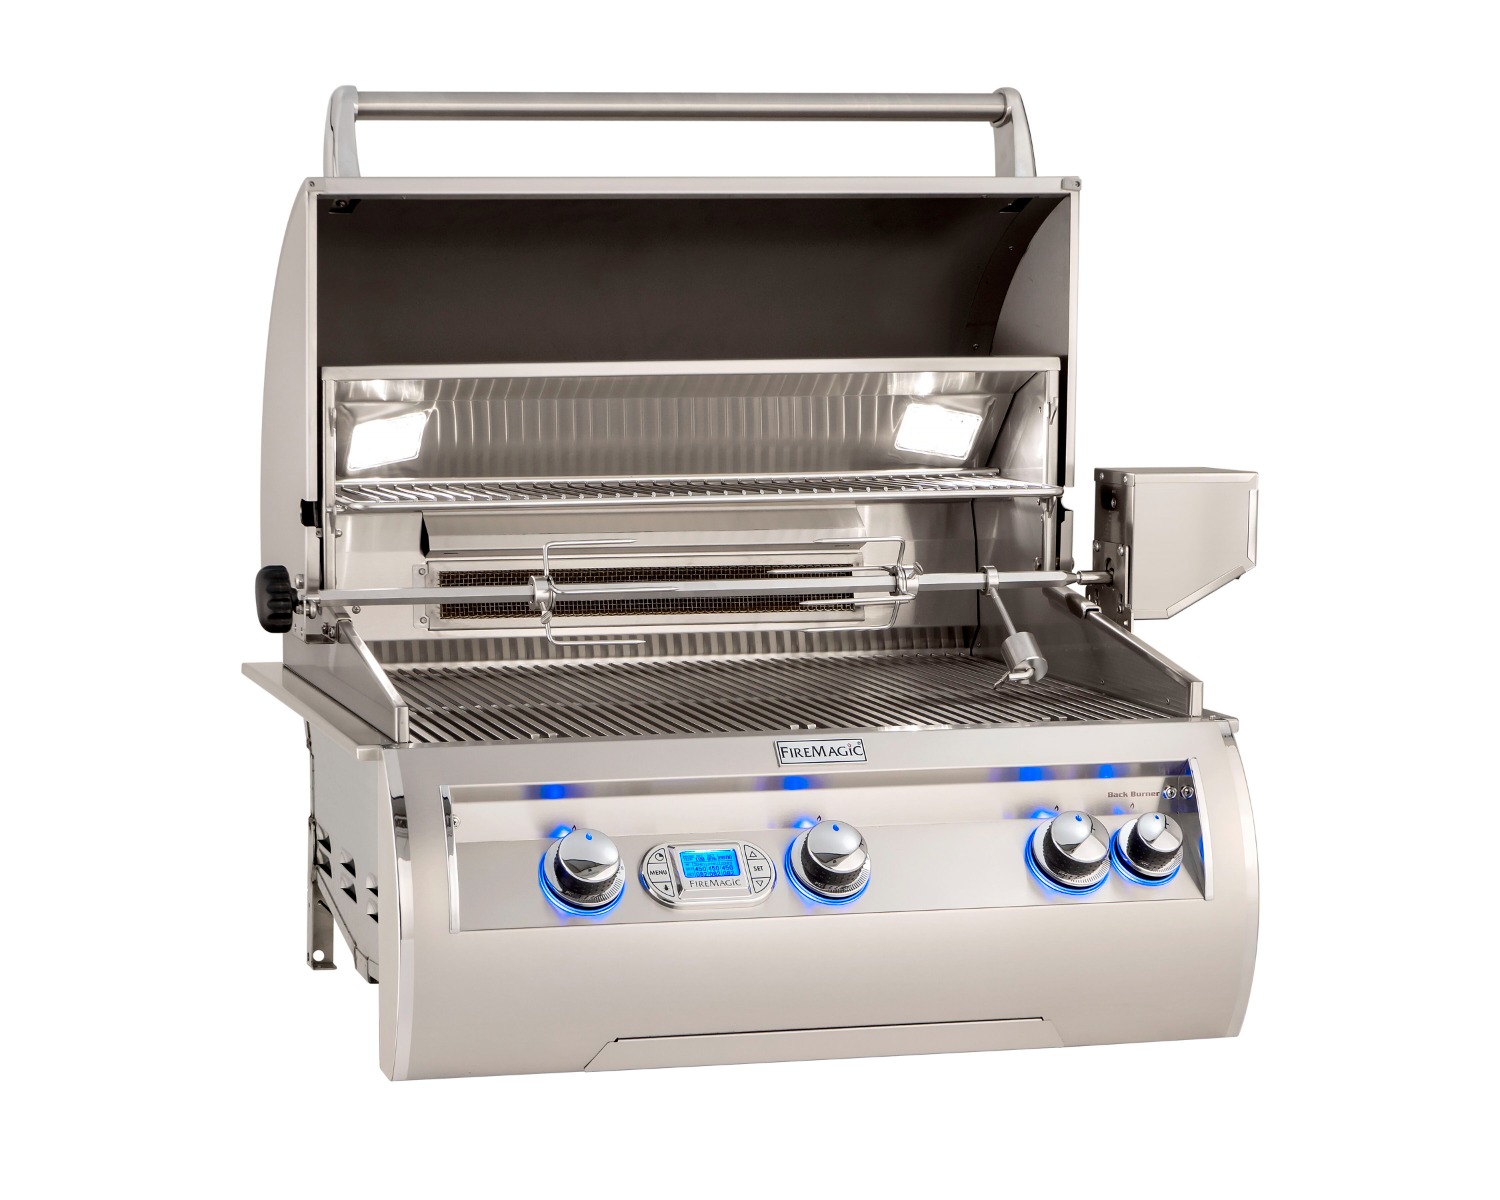 Fire Magic Echelon Diamond E660I 30-Inch Built-In Grill with Rotisserie - Digital Thermometer, Natural Gas